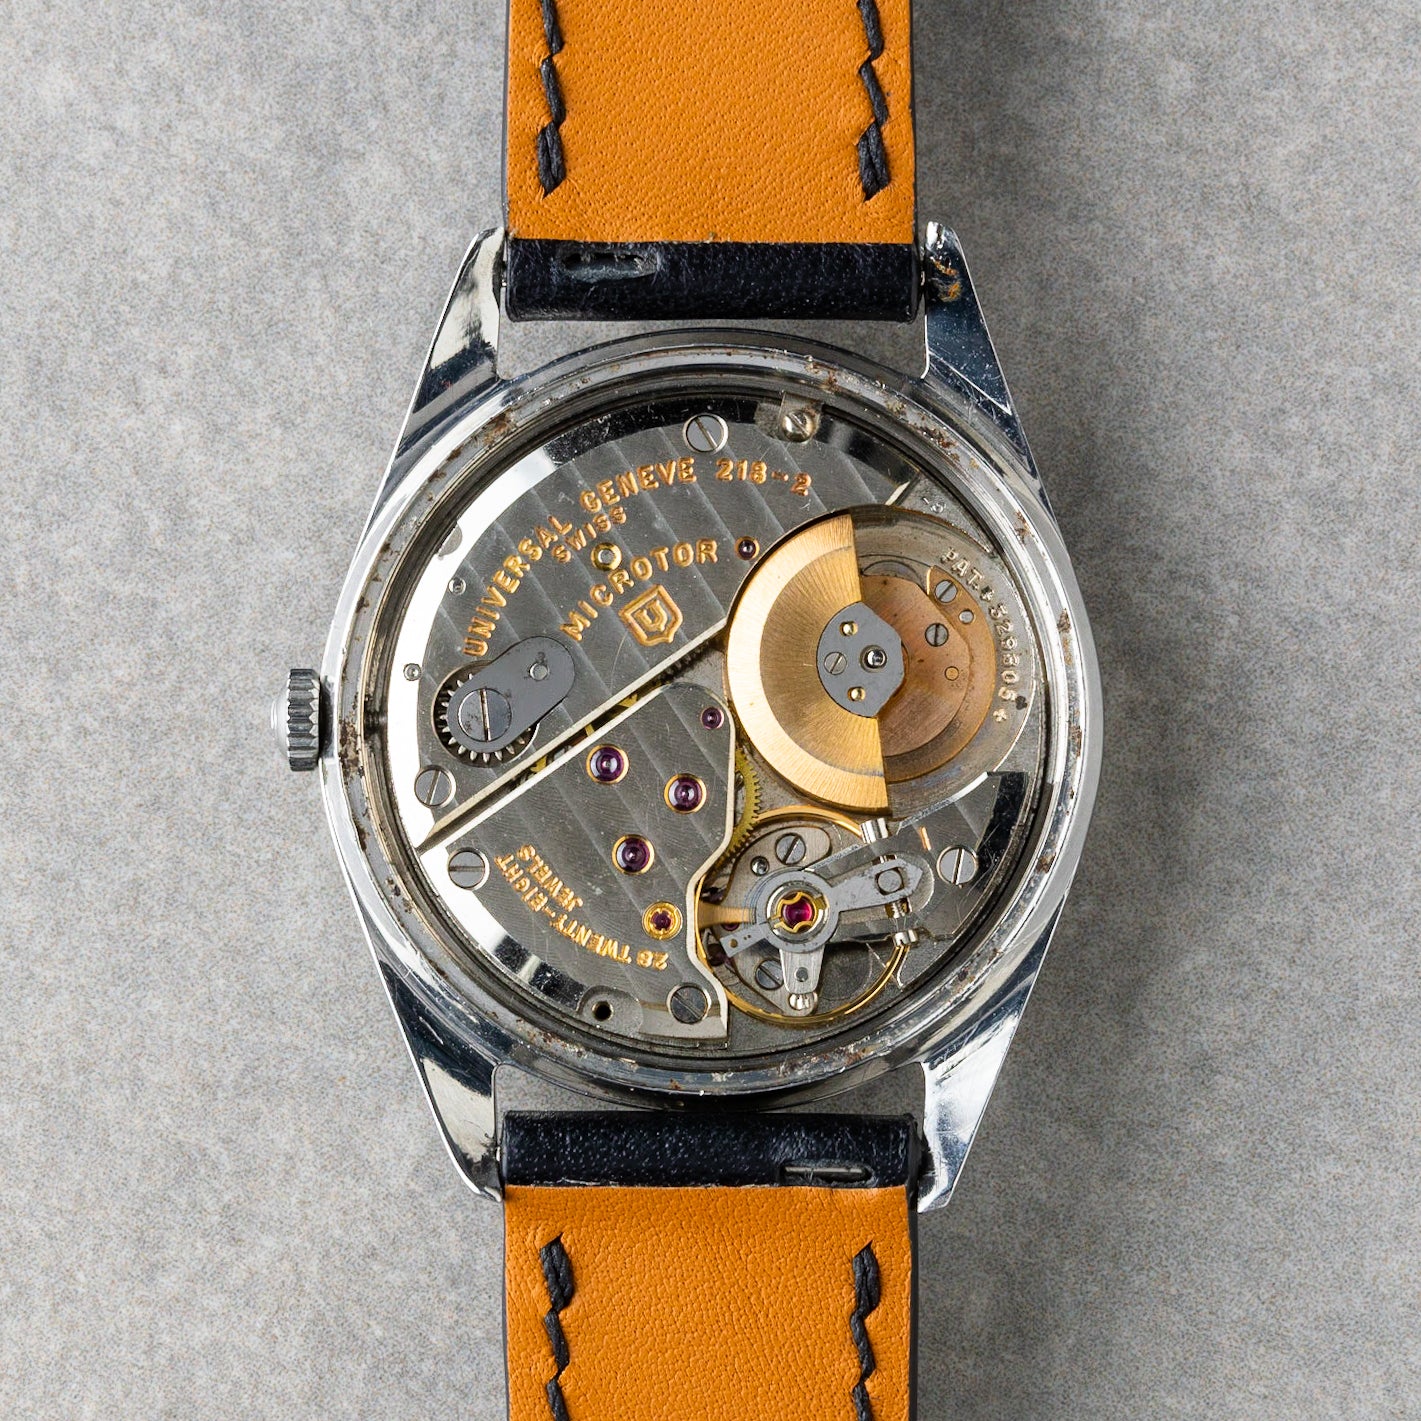 1960 "Tropical" Universal Genève Polerouter Date Automatic Microtor Ref. 204610-2